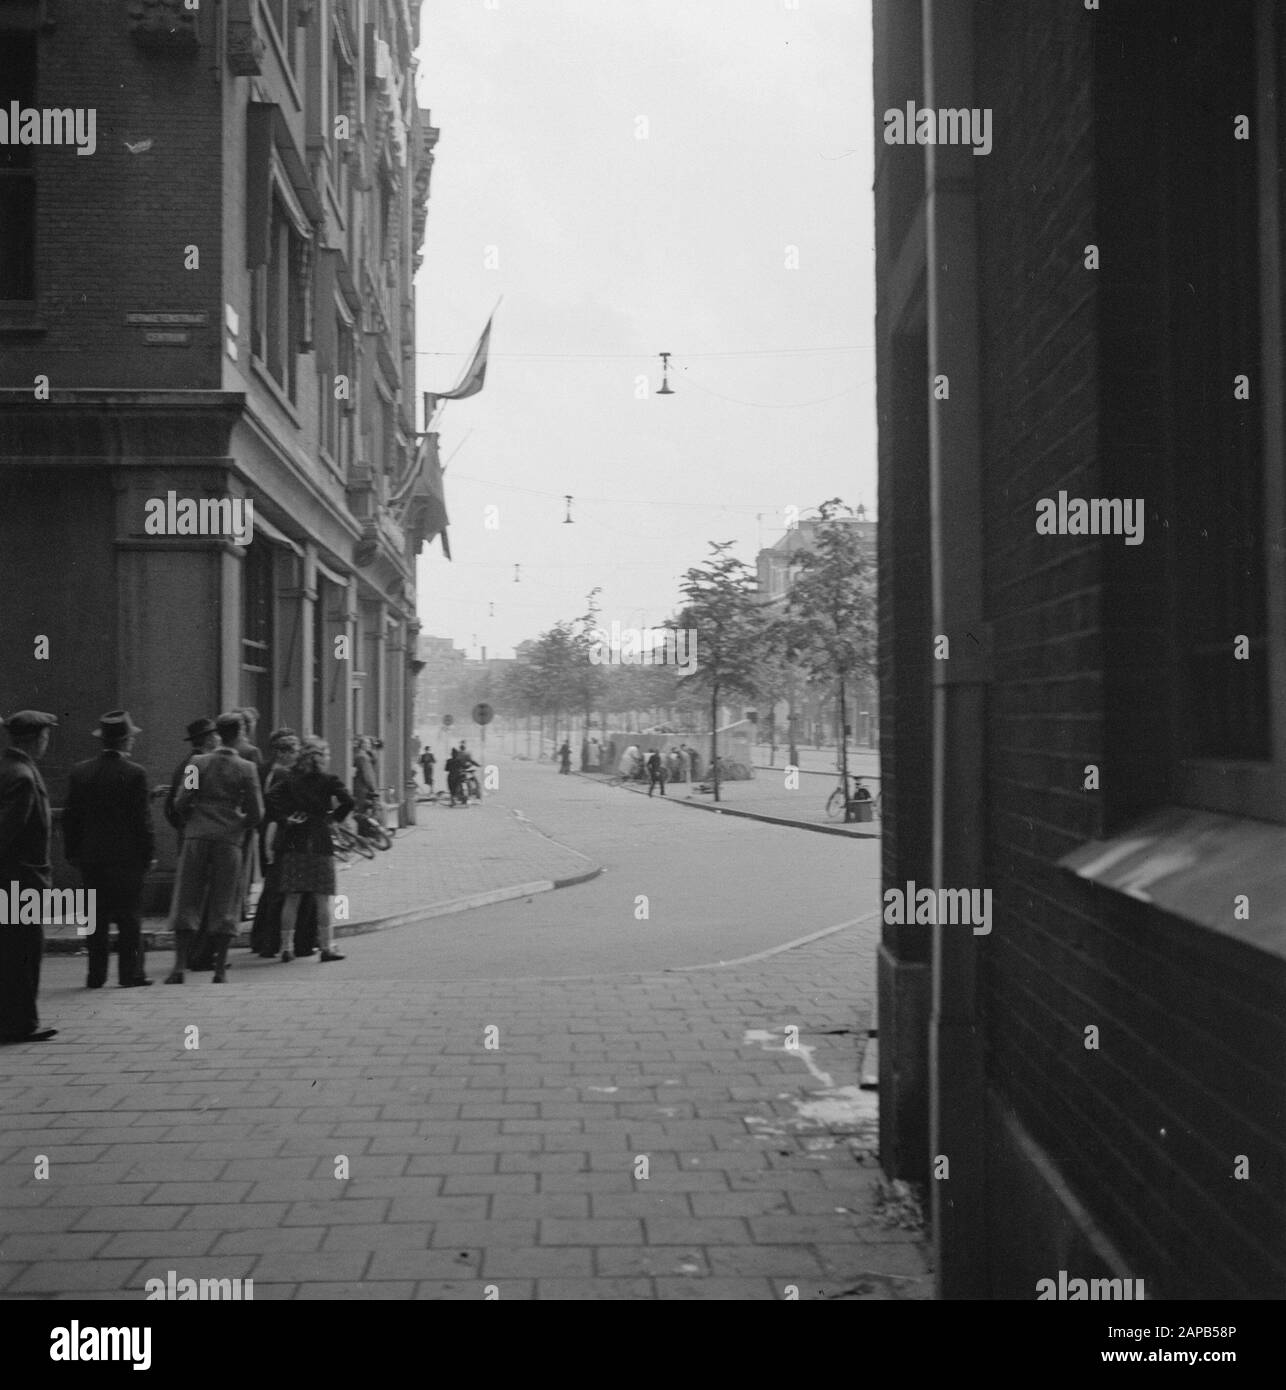 Liberation Joy: Amsterdam Description: Citizens looking for cover on the Rokin. Annotation: The liberation of Amsterdam resulted in a violent shooting incident between a unit of the BS (Domestic Armed Forces) and German soldiers, who were located in the building of the Grand Club on Dam Square. Date: 7 May 1945 Location: Amsterdam, Noord-Holland Keywords: liberation, World War II Stock Photo